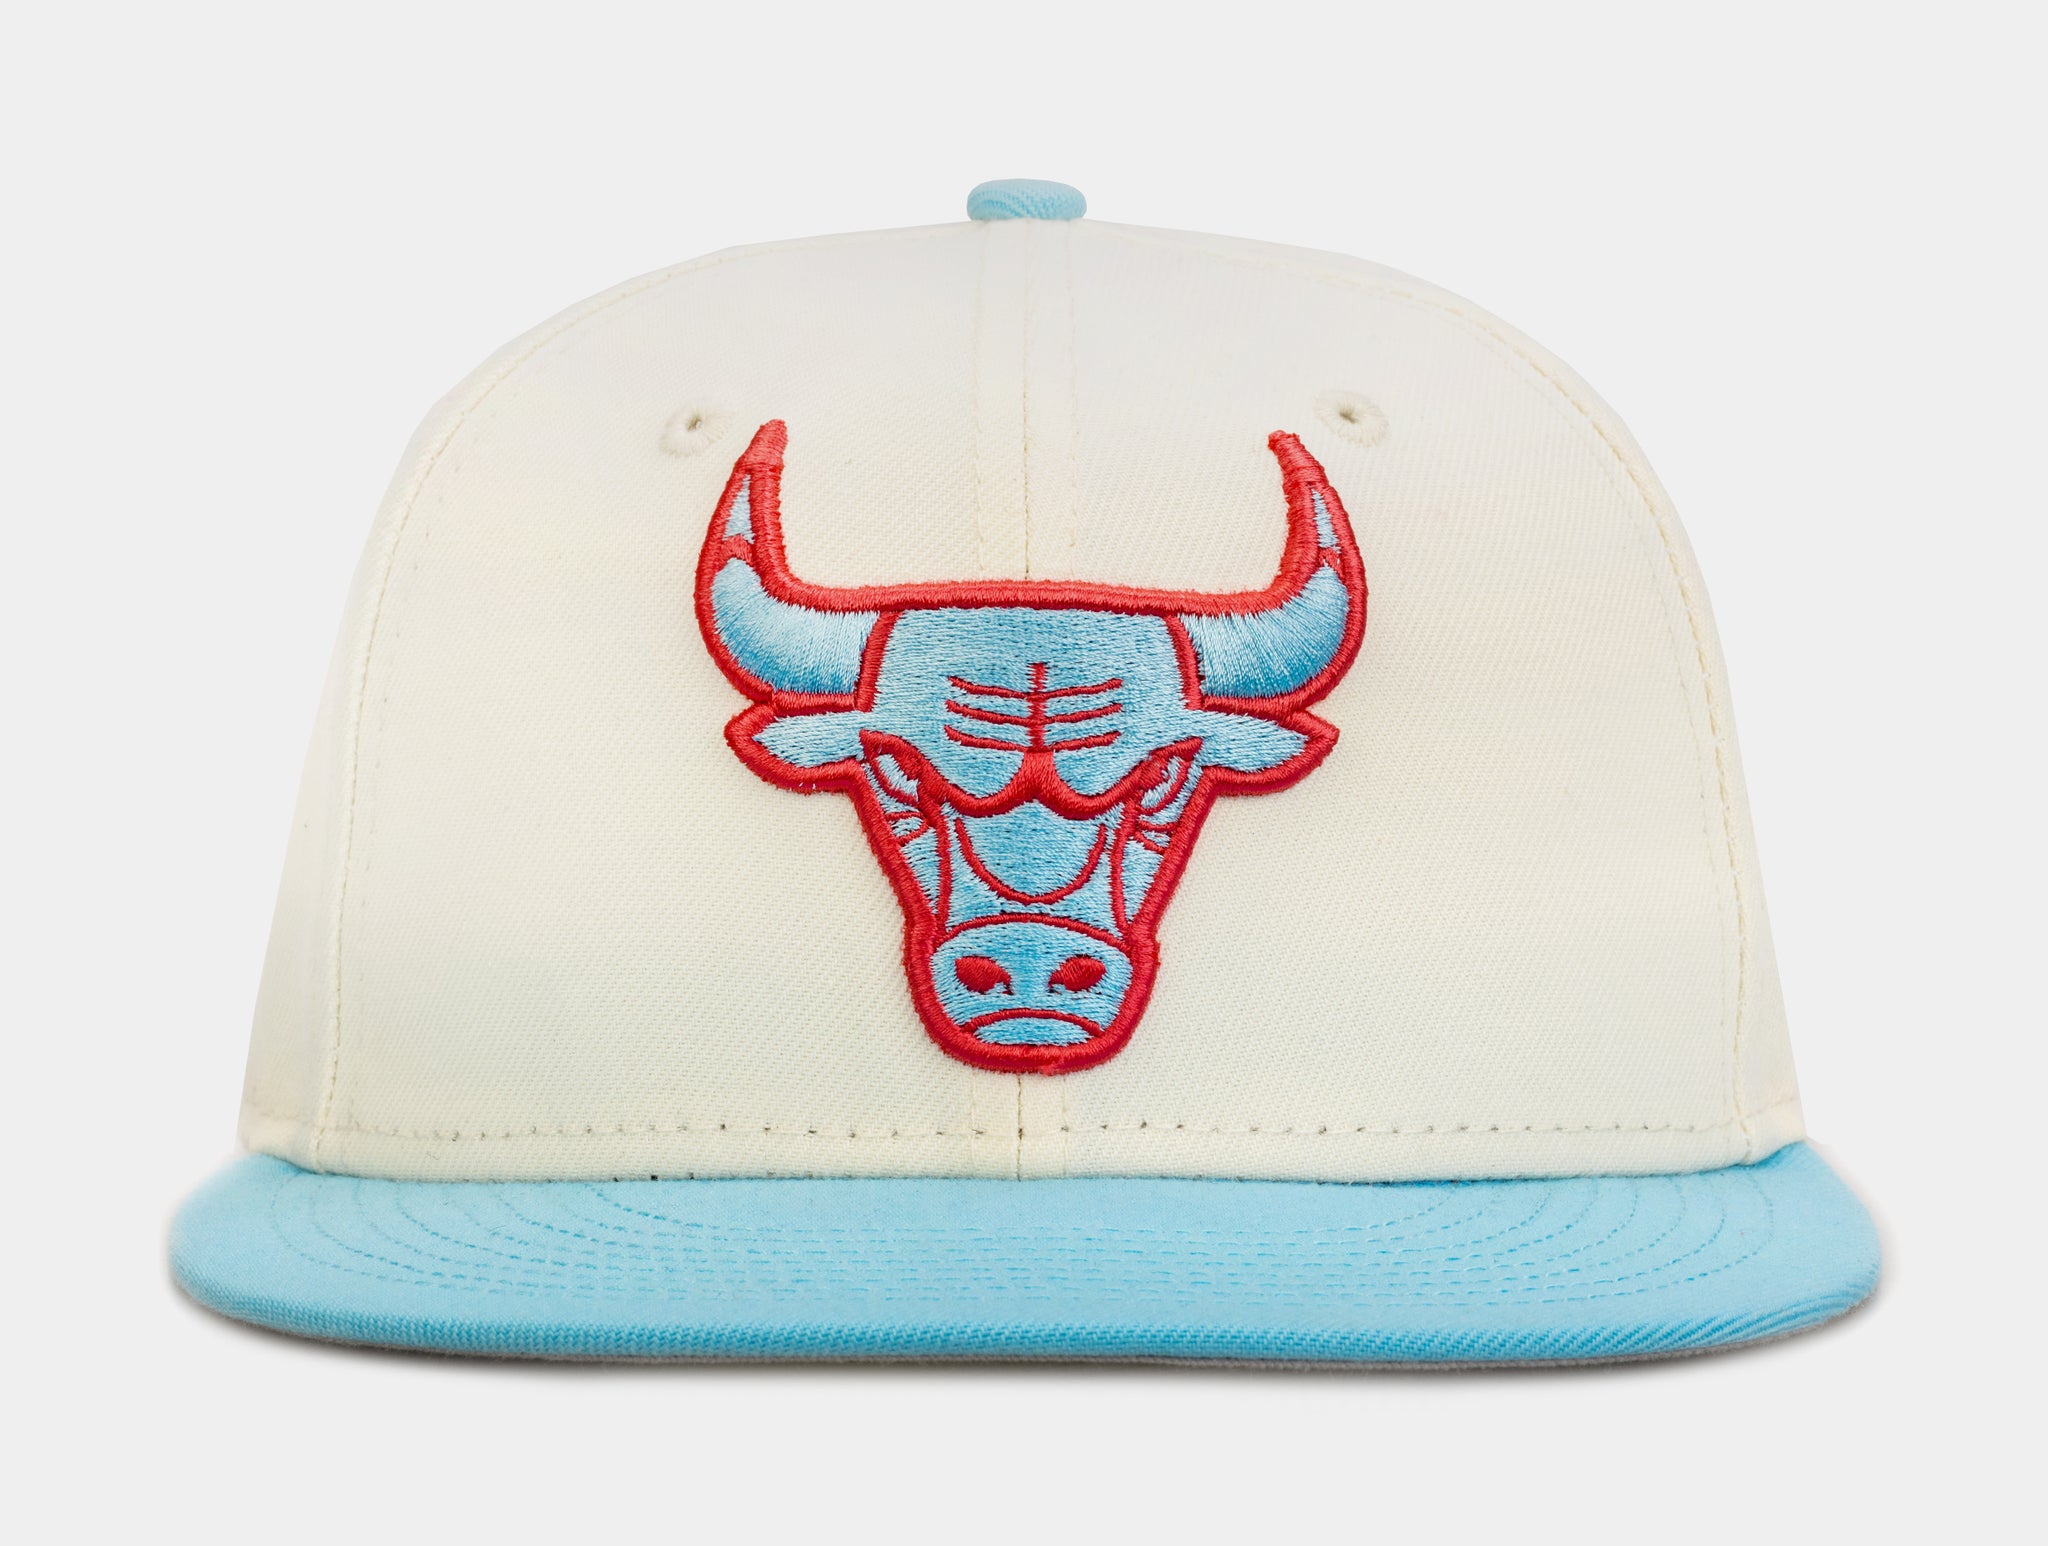 New Era Chicago Bulls Blue & Yellow Color Pack 59Fifty Fitted Hat